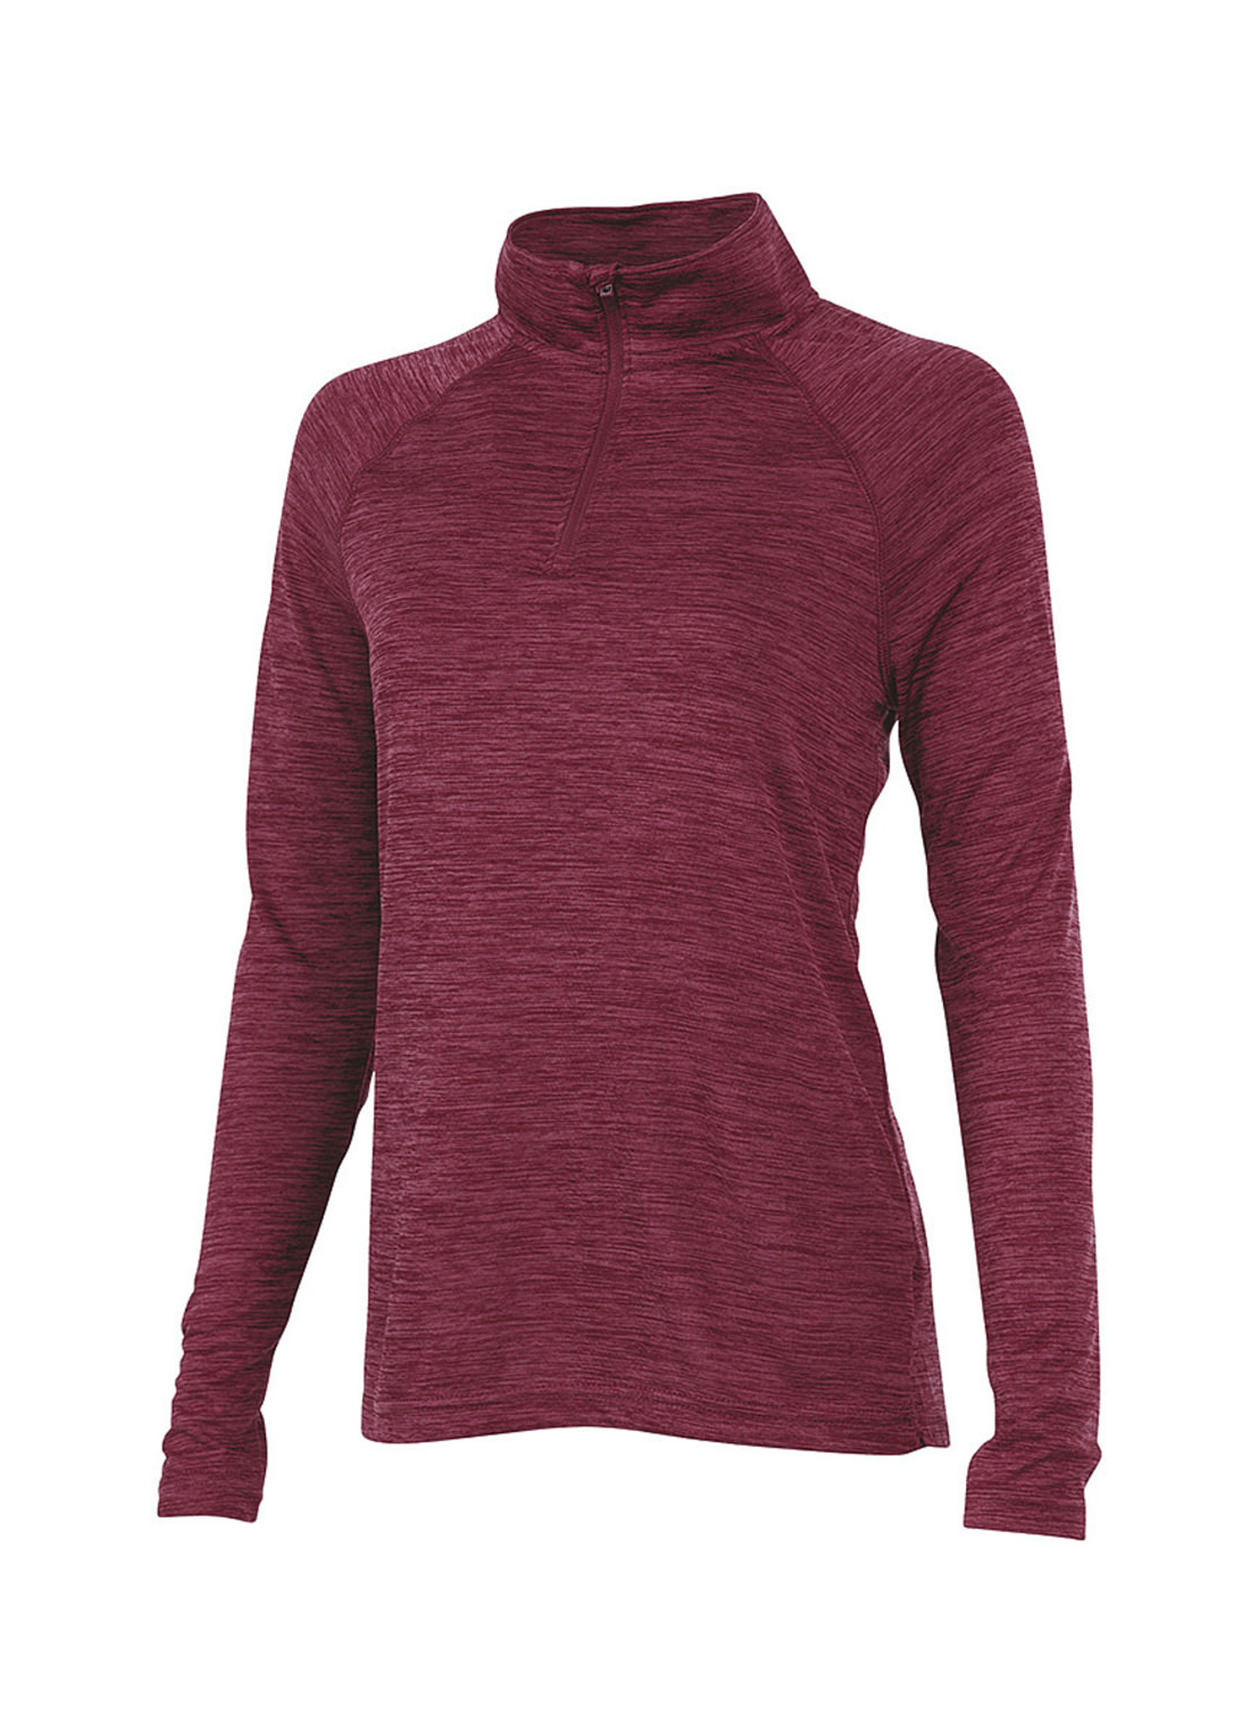 Charles River Women's Maroon Space Dyed Quarter-Zip